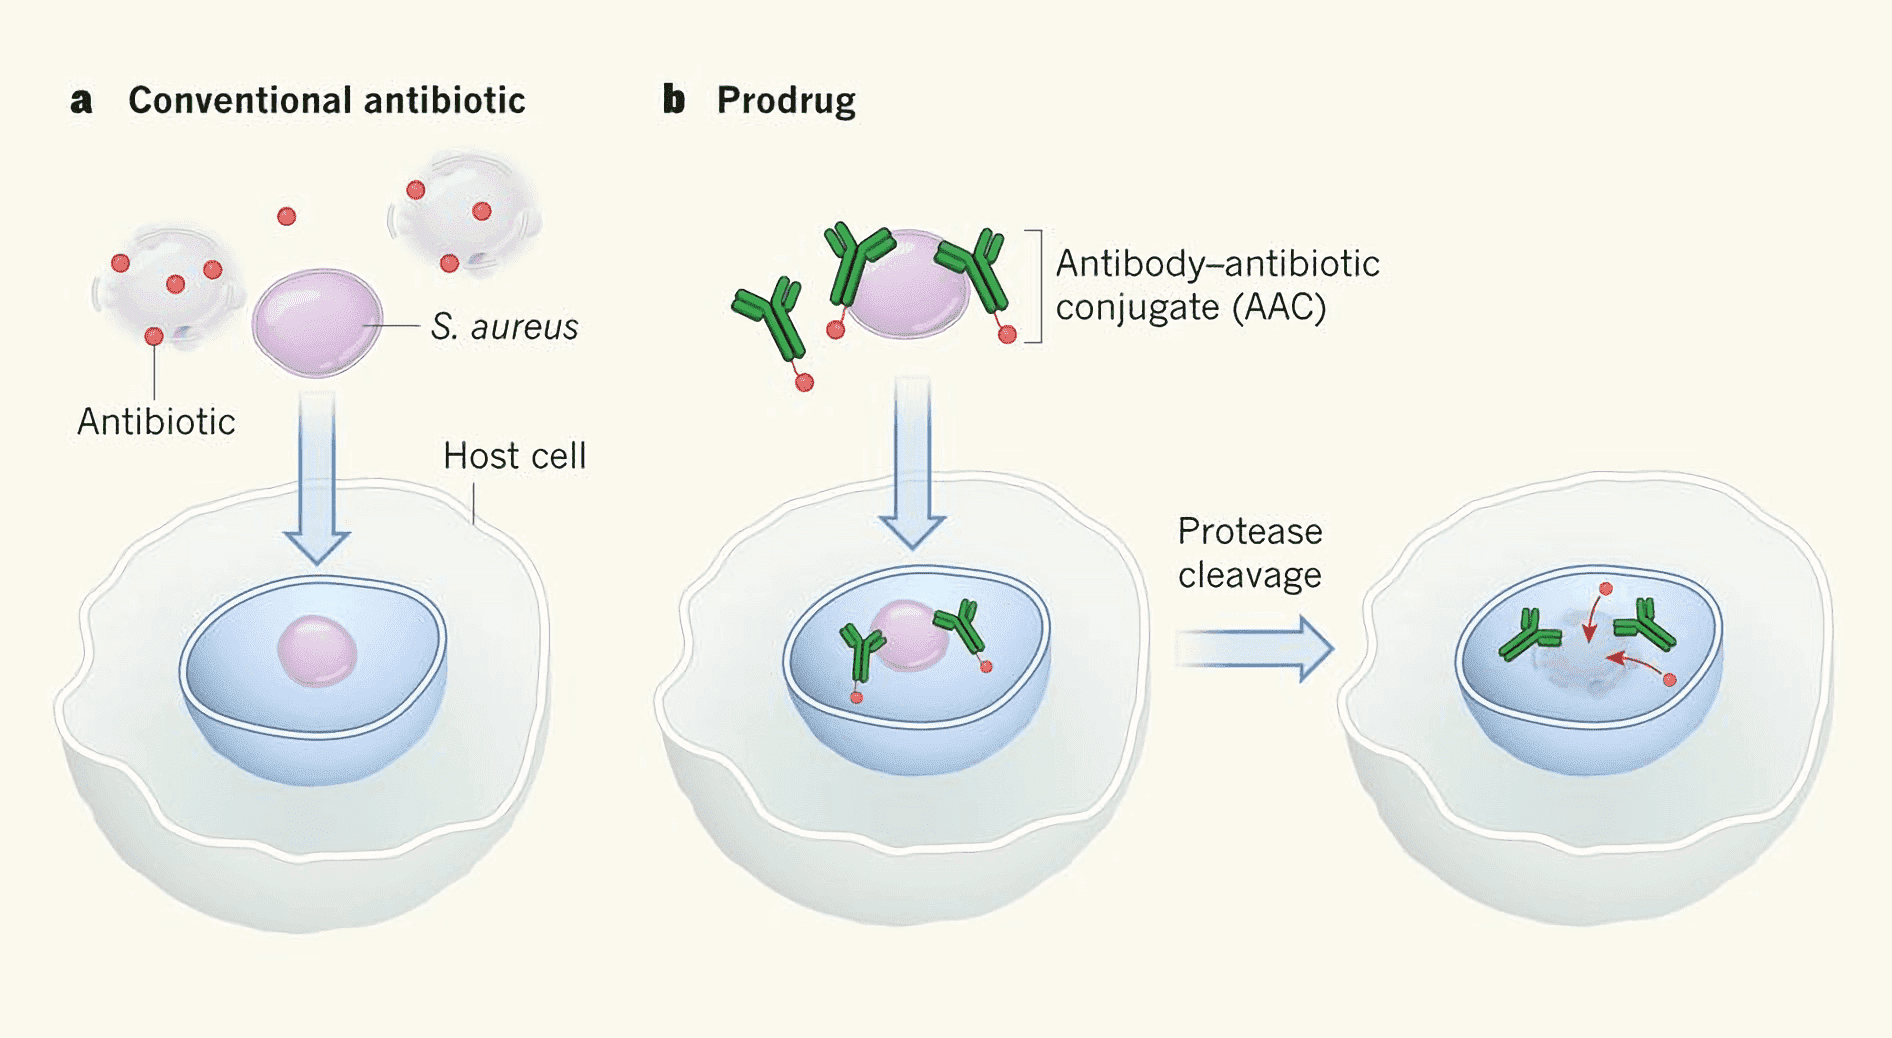 Targeted intracellular antibiotic release. a, Staphylococcus aureus infections are notoriously difficult to treat because the bacteria enter host cells and ‘hide’ in intracellular compartments that conventional antibiotics cannot reach or where they are inactive. b, Antibiotic covalently linked to an antibody that binds to components of the S. aureus cell wall. This prodrug coats the bacterial cell surface but remains inactive until the bacteria enter the host cell. There, protease enzymes cleave the linker region, releasing the active antibiotic, which then kills the bacteria.